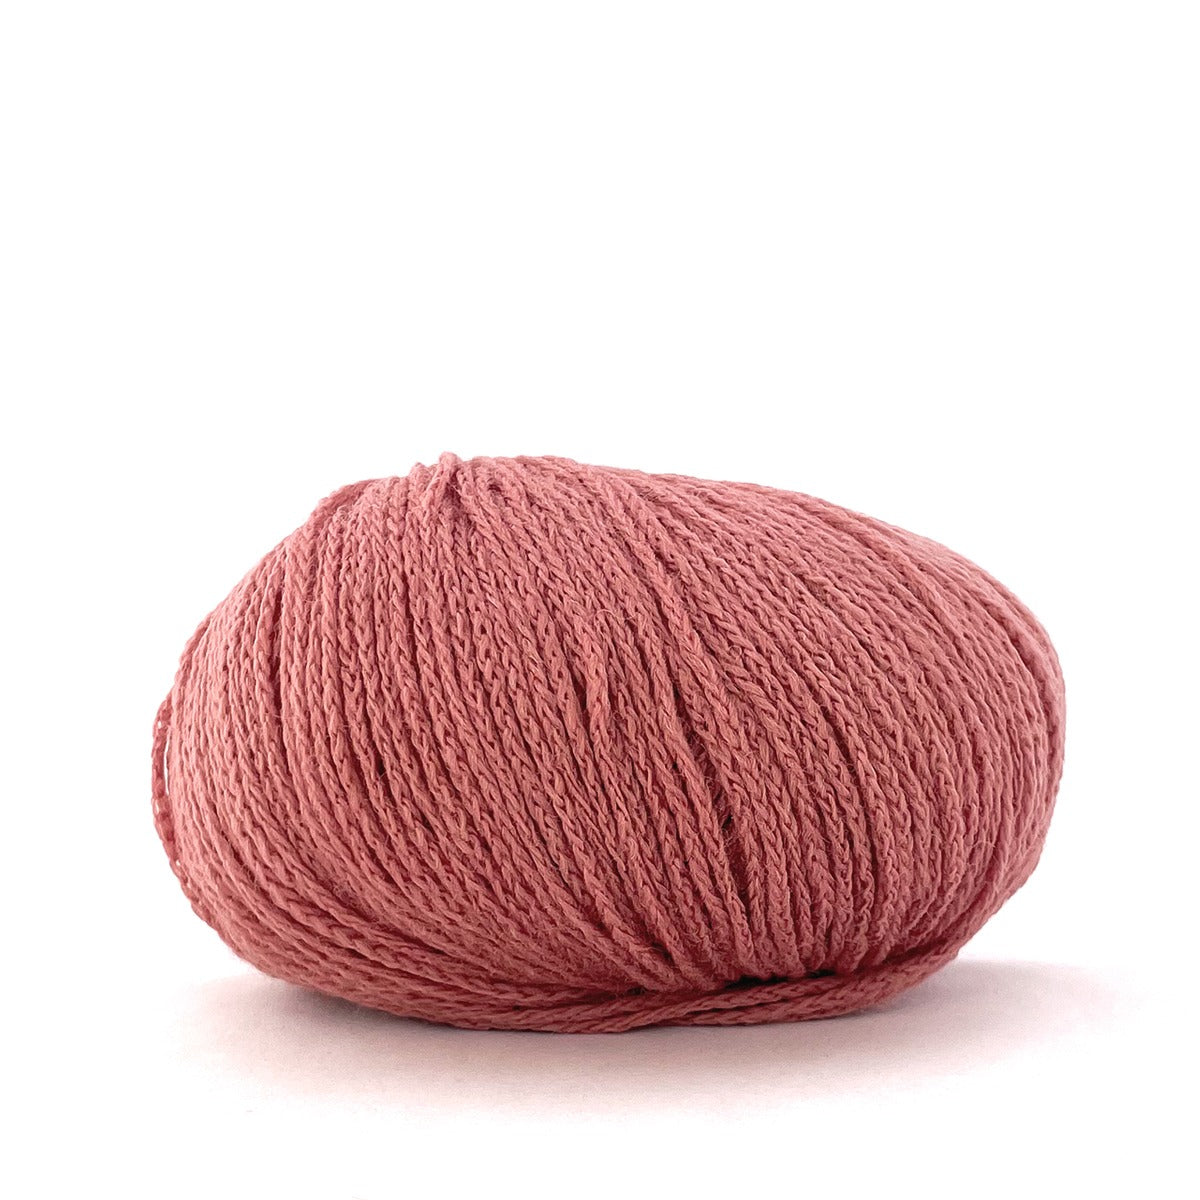 BC Garn Semilla Cable Collection yarn - Colour 05 Old Rose